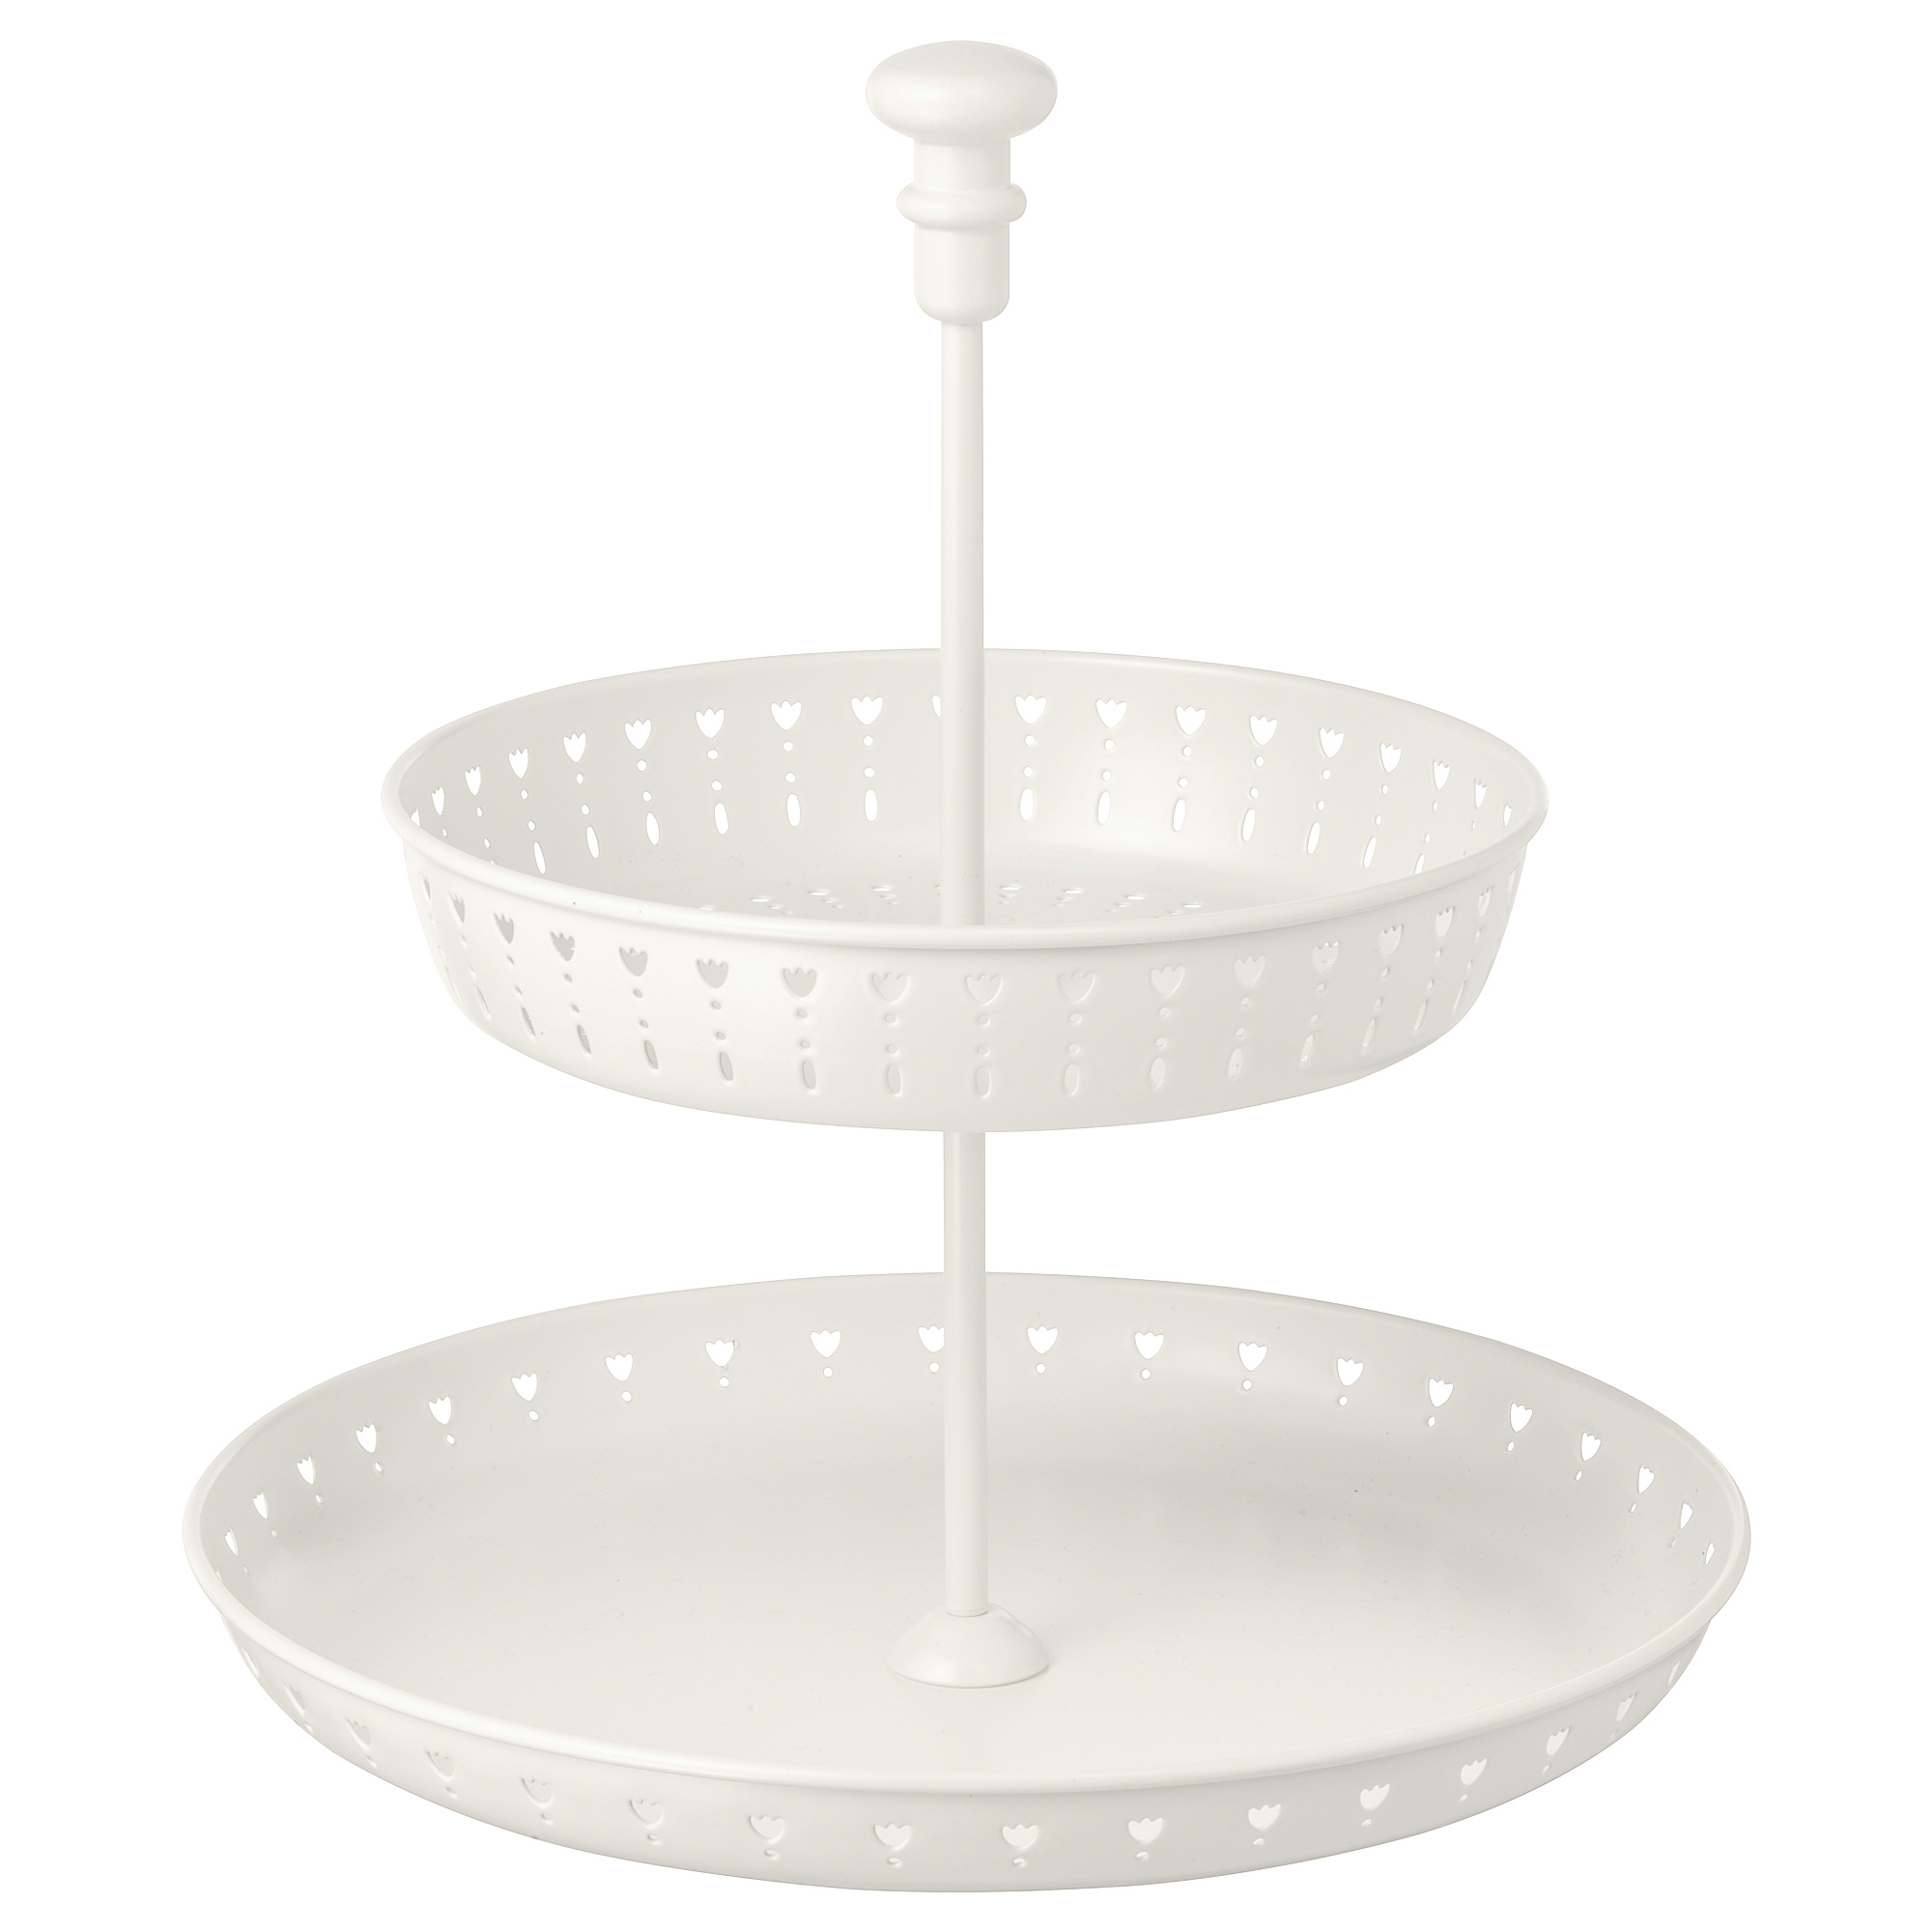 GARNERA serving stand, two tiers